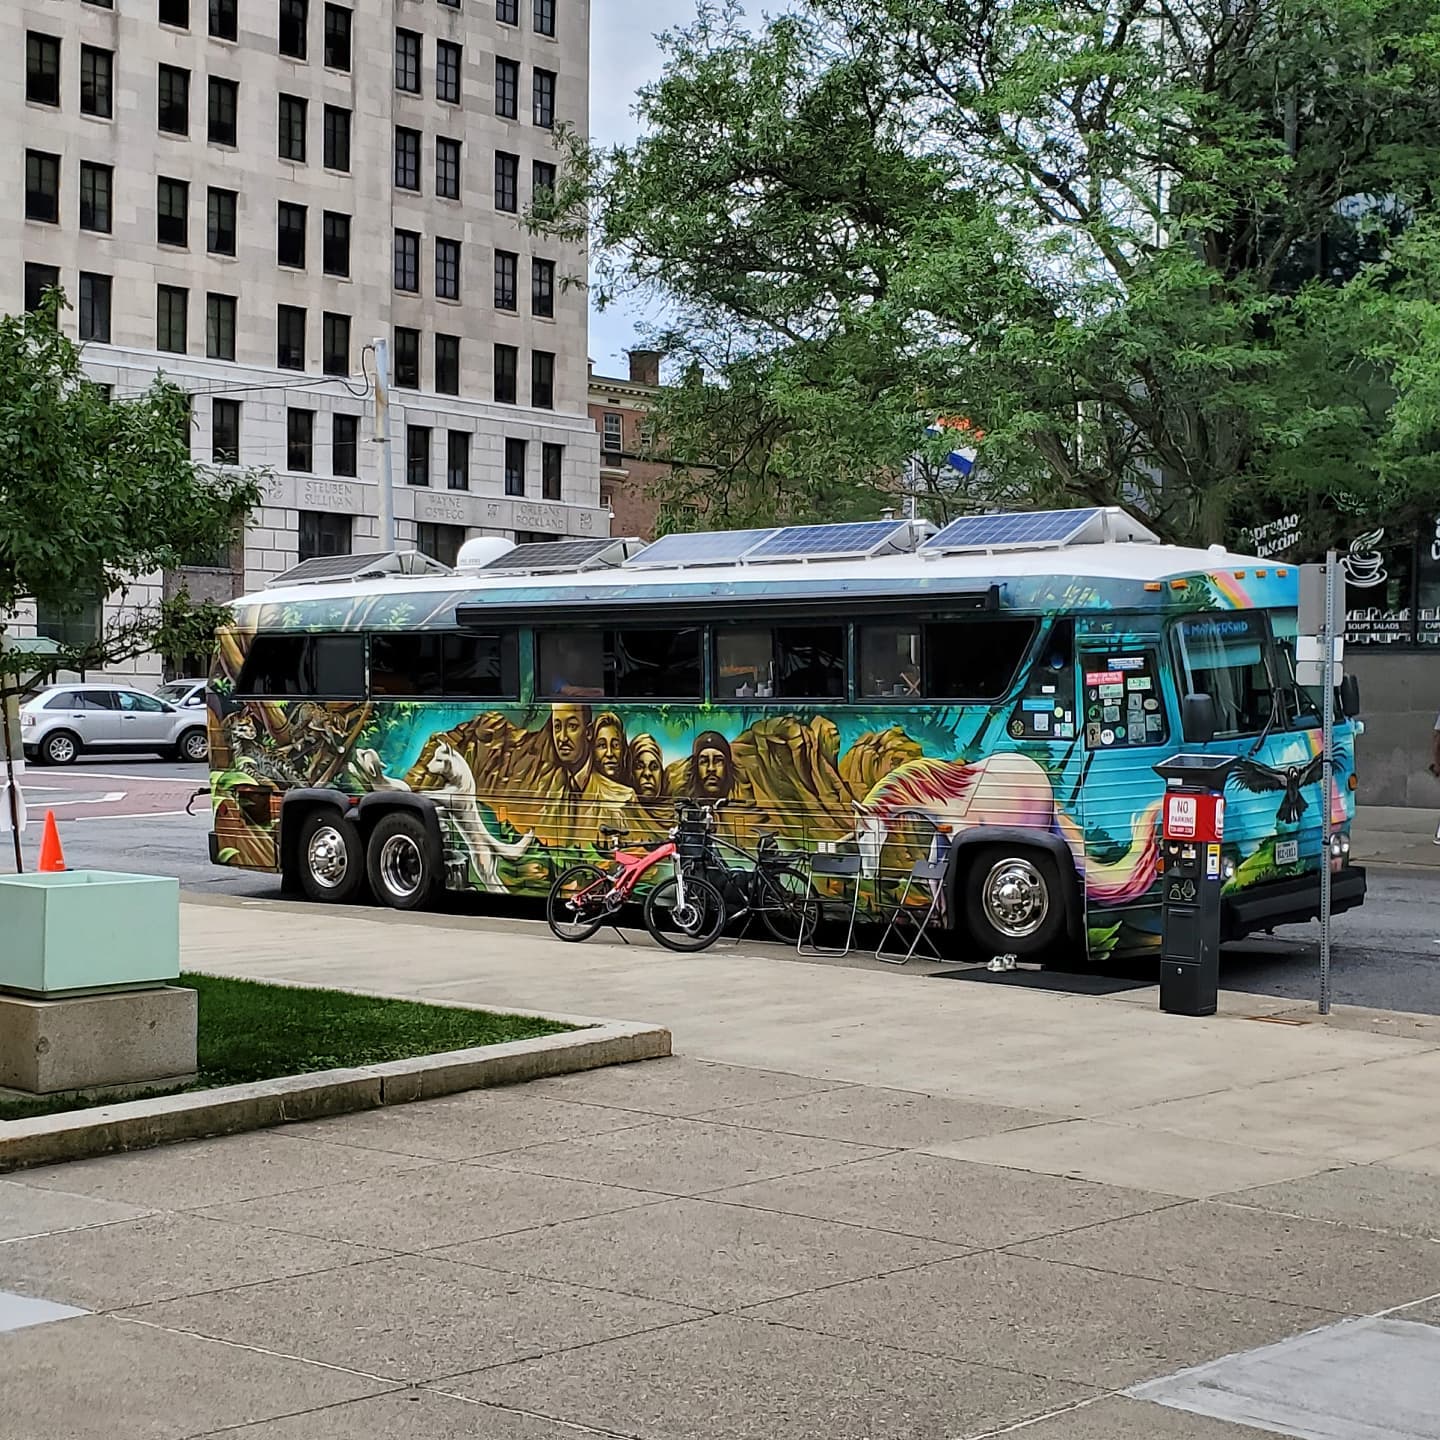 Woody Harrelson's solar-powered hippie bus parked outside my office. Photo by Adam L. in Albany, New York.